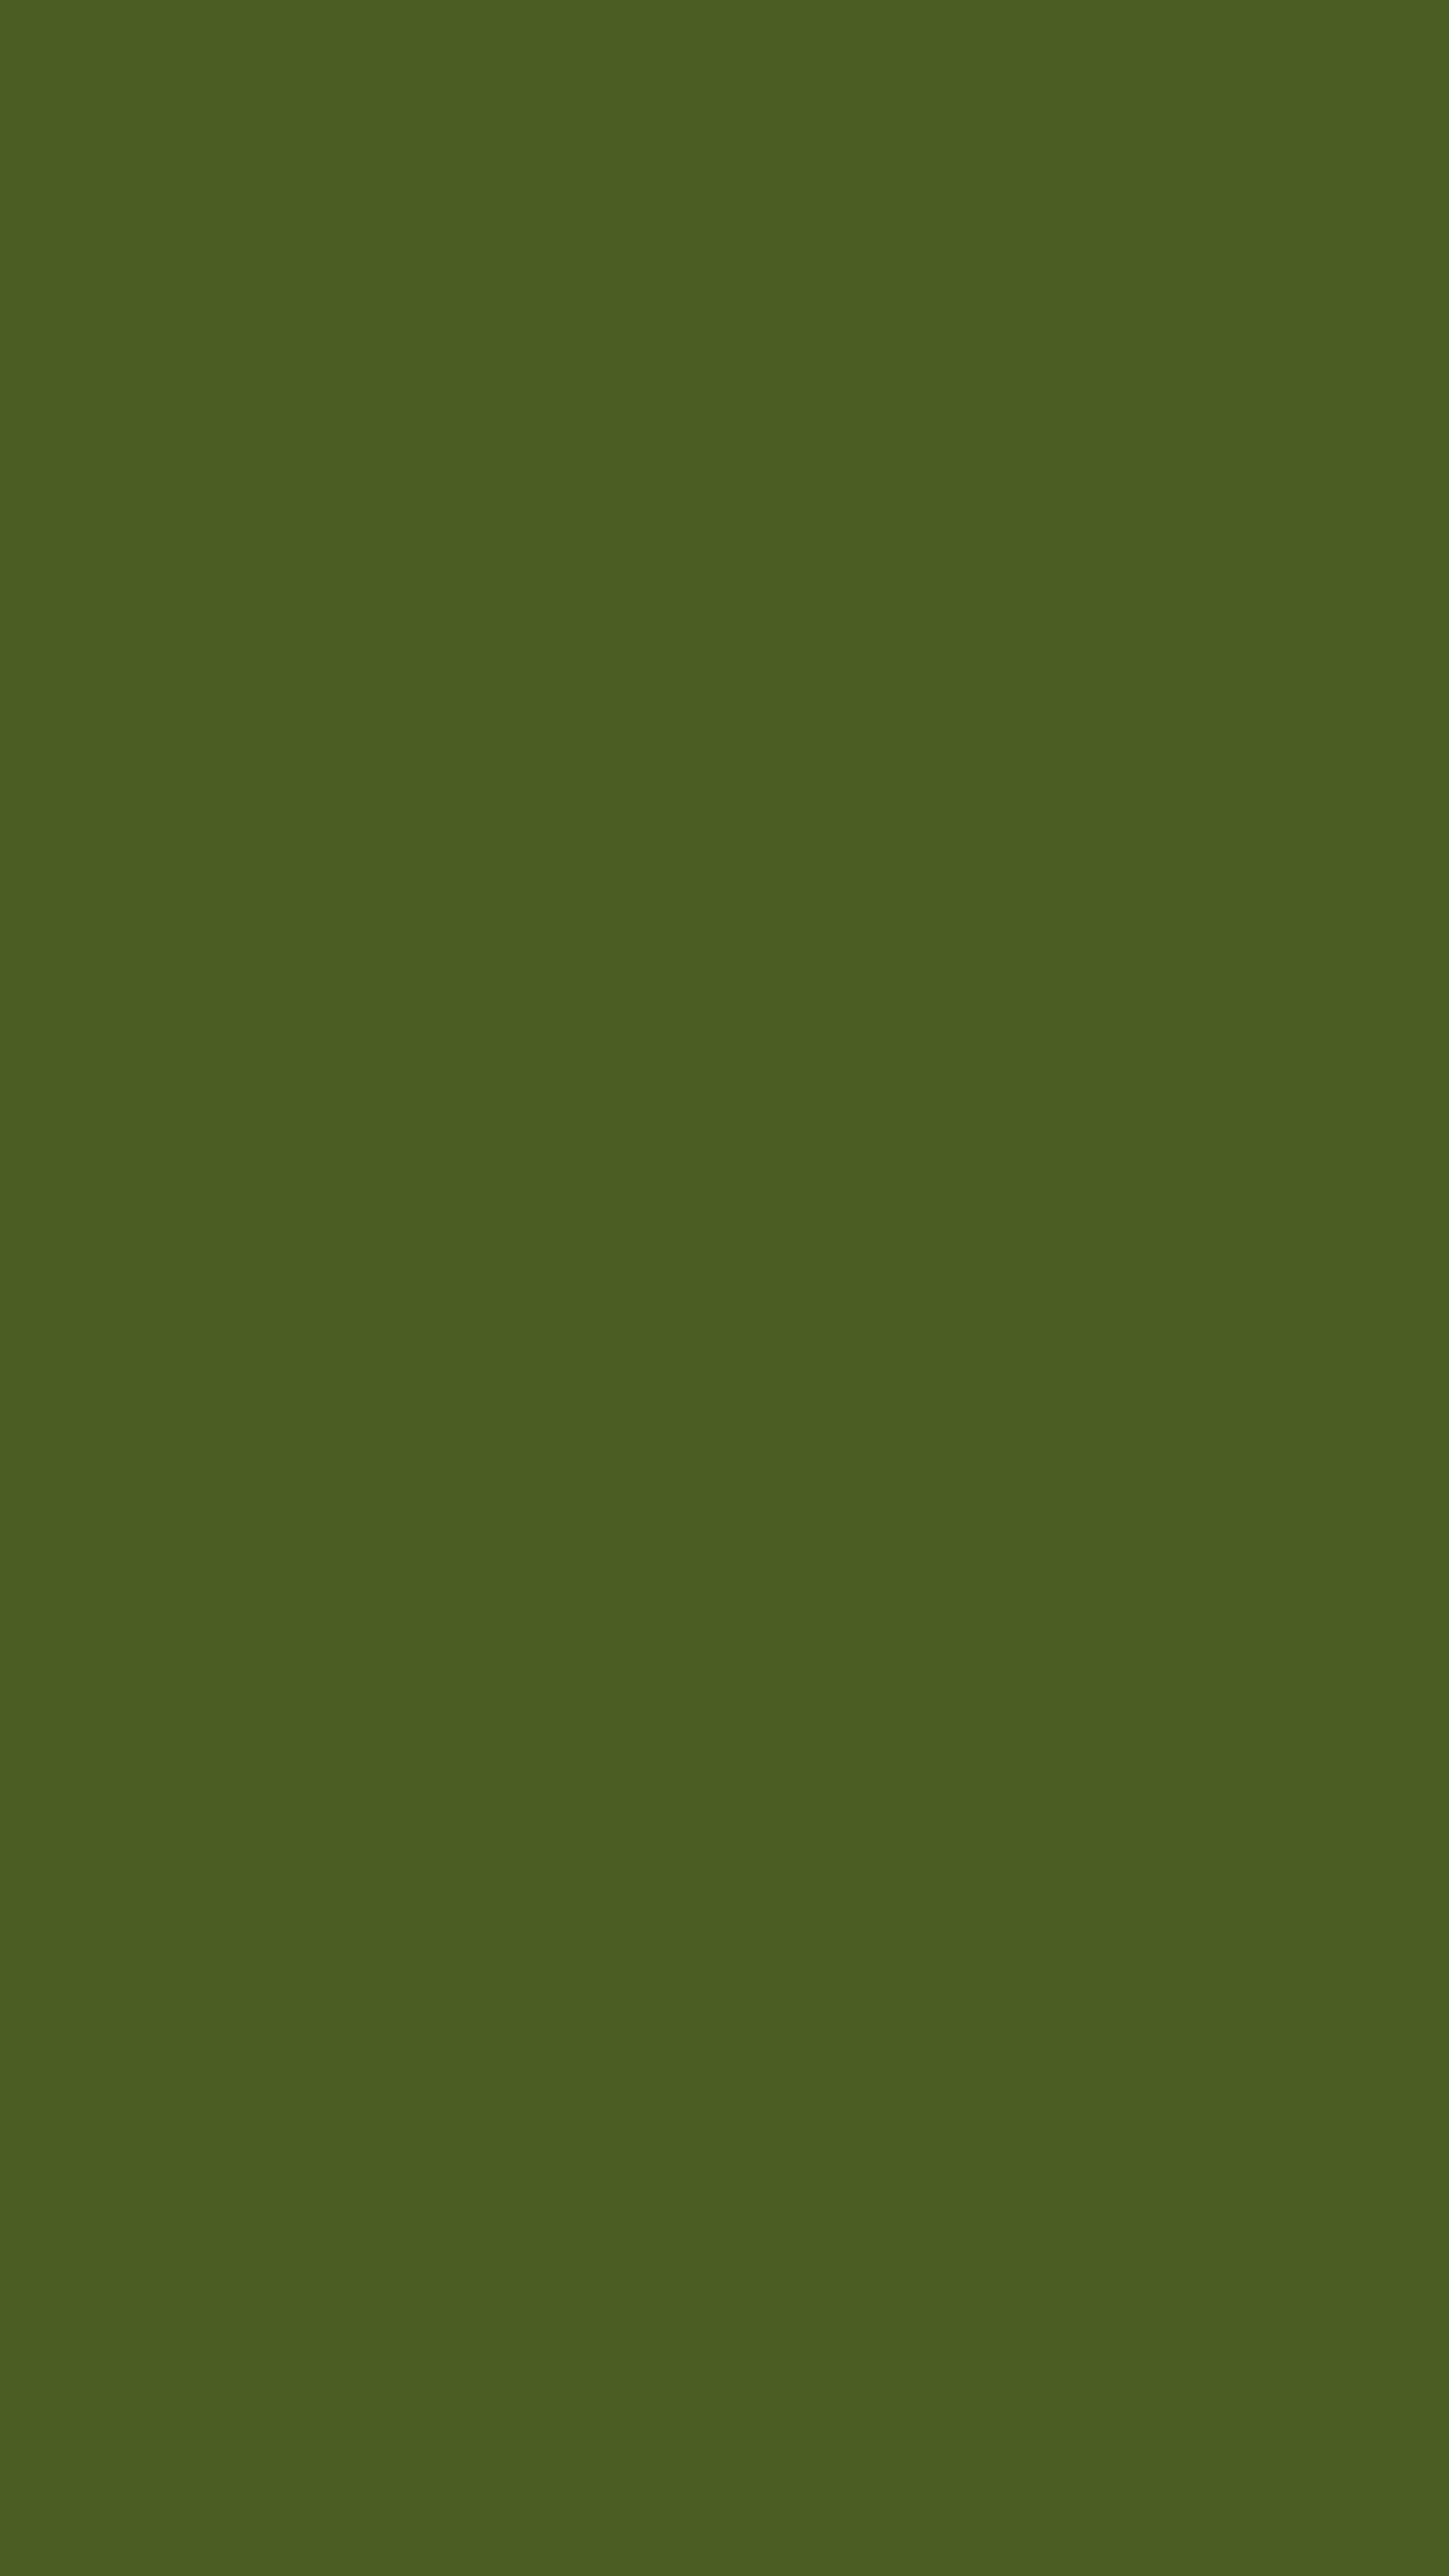 UP Forest Green Solid Color Background Olive Green HD phone wallpaper   Pxfuel